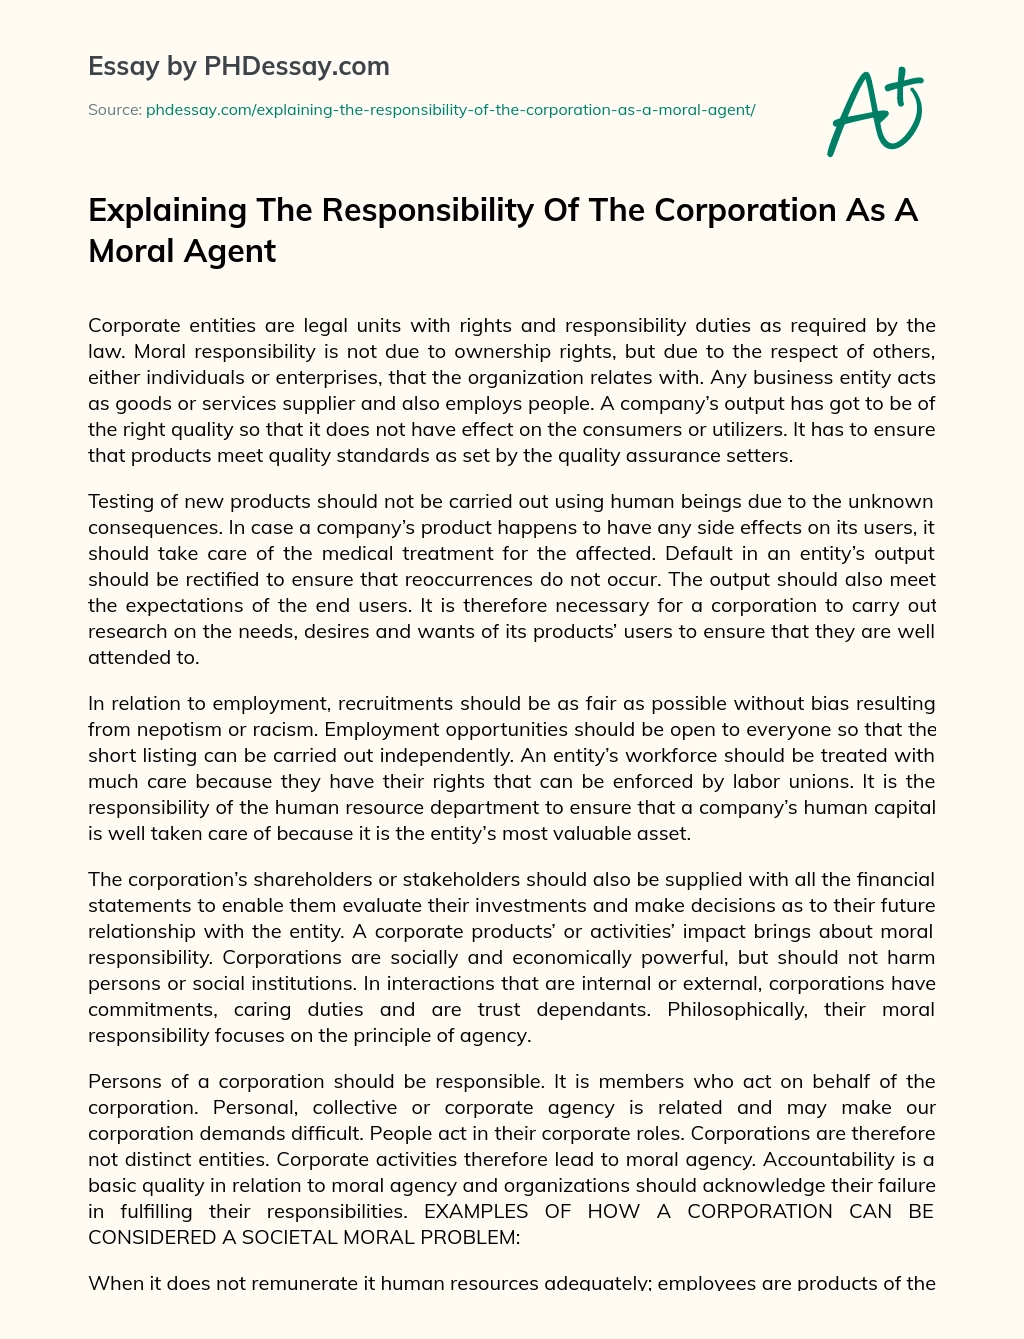 Explaining The Responsibility Of The Corporation As A Moral Agent essay